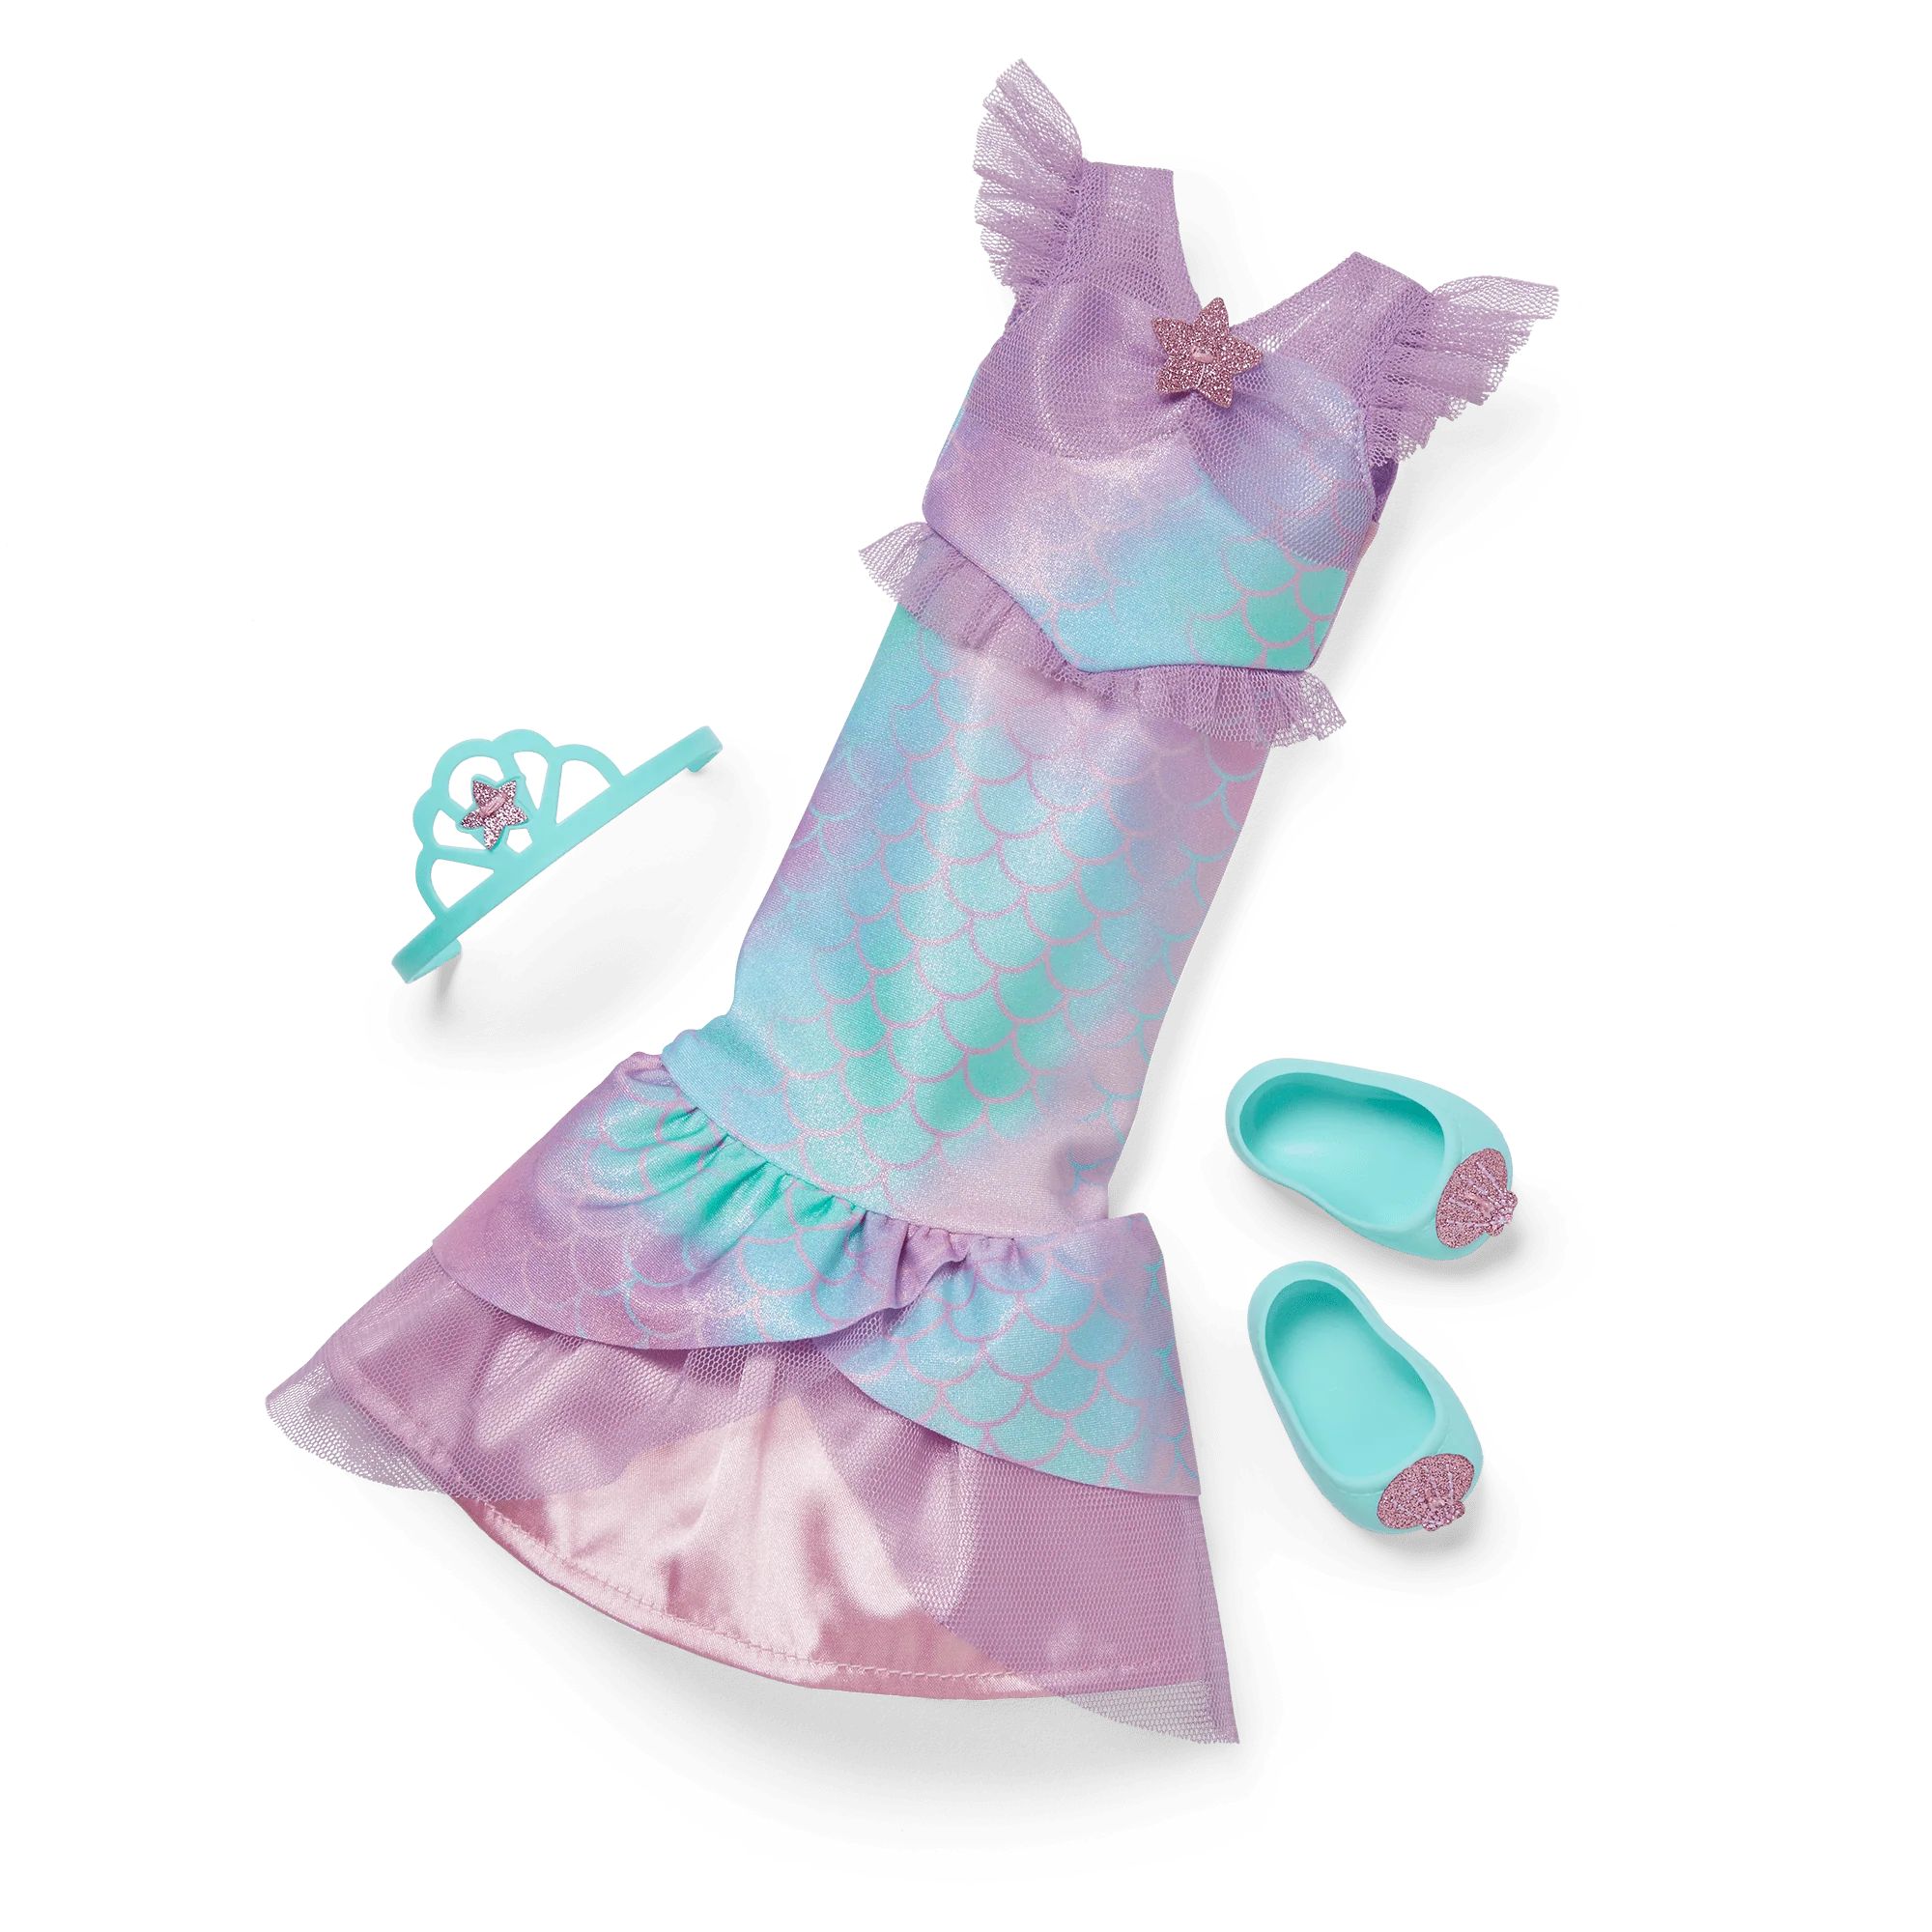 2-in-1 Sparkly Mermaid Outfit for WellieWishers™ Dolls | American Girl